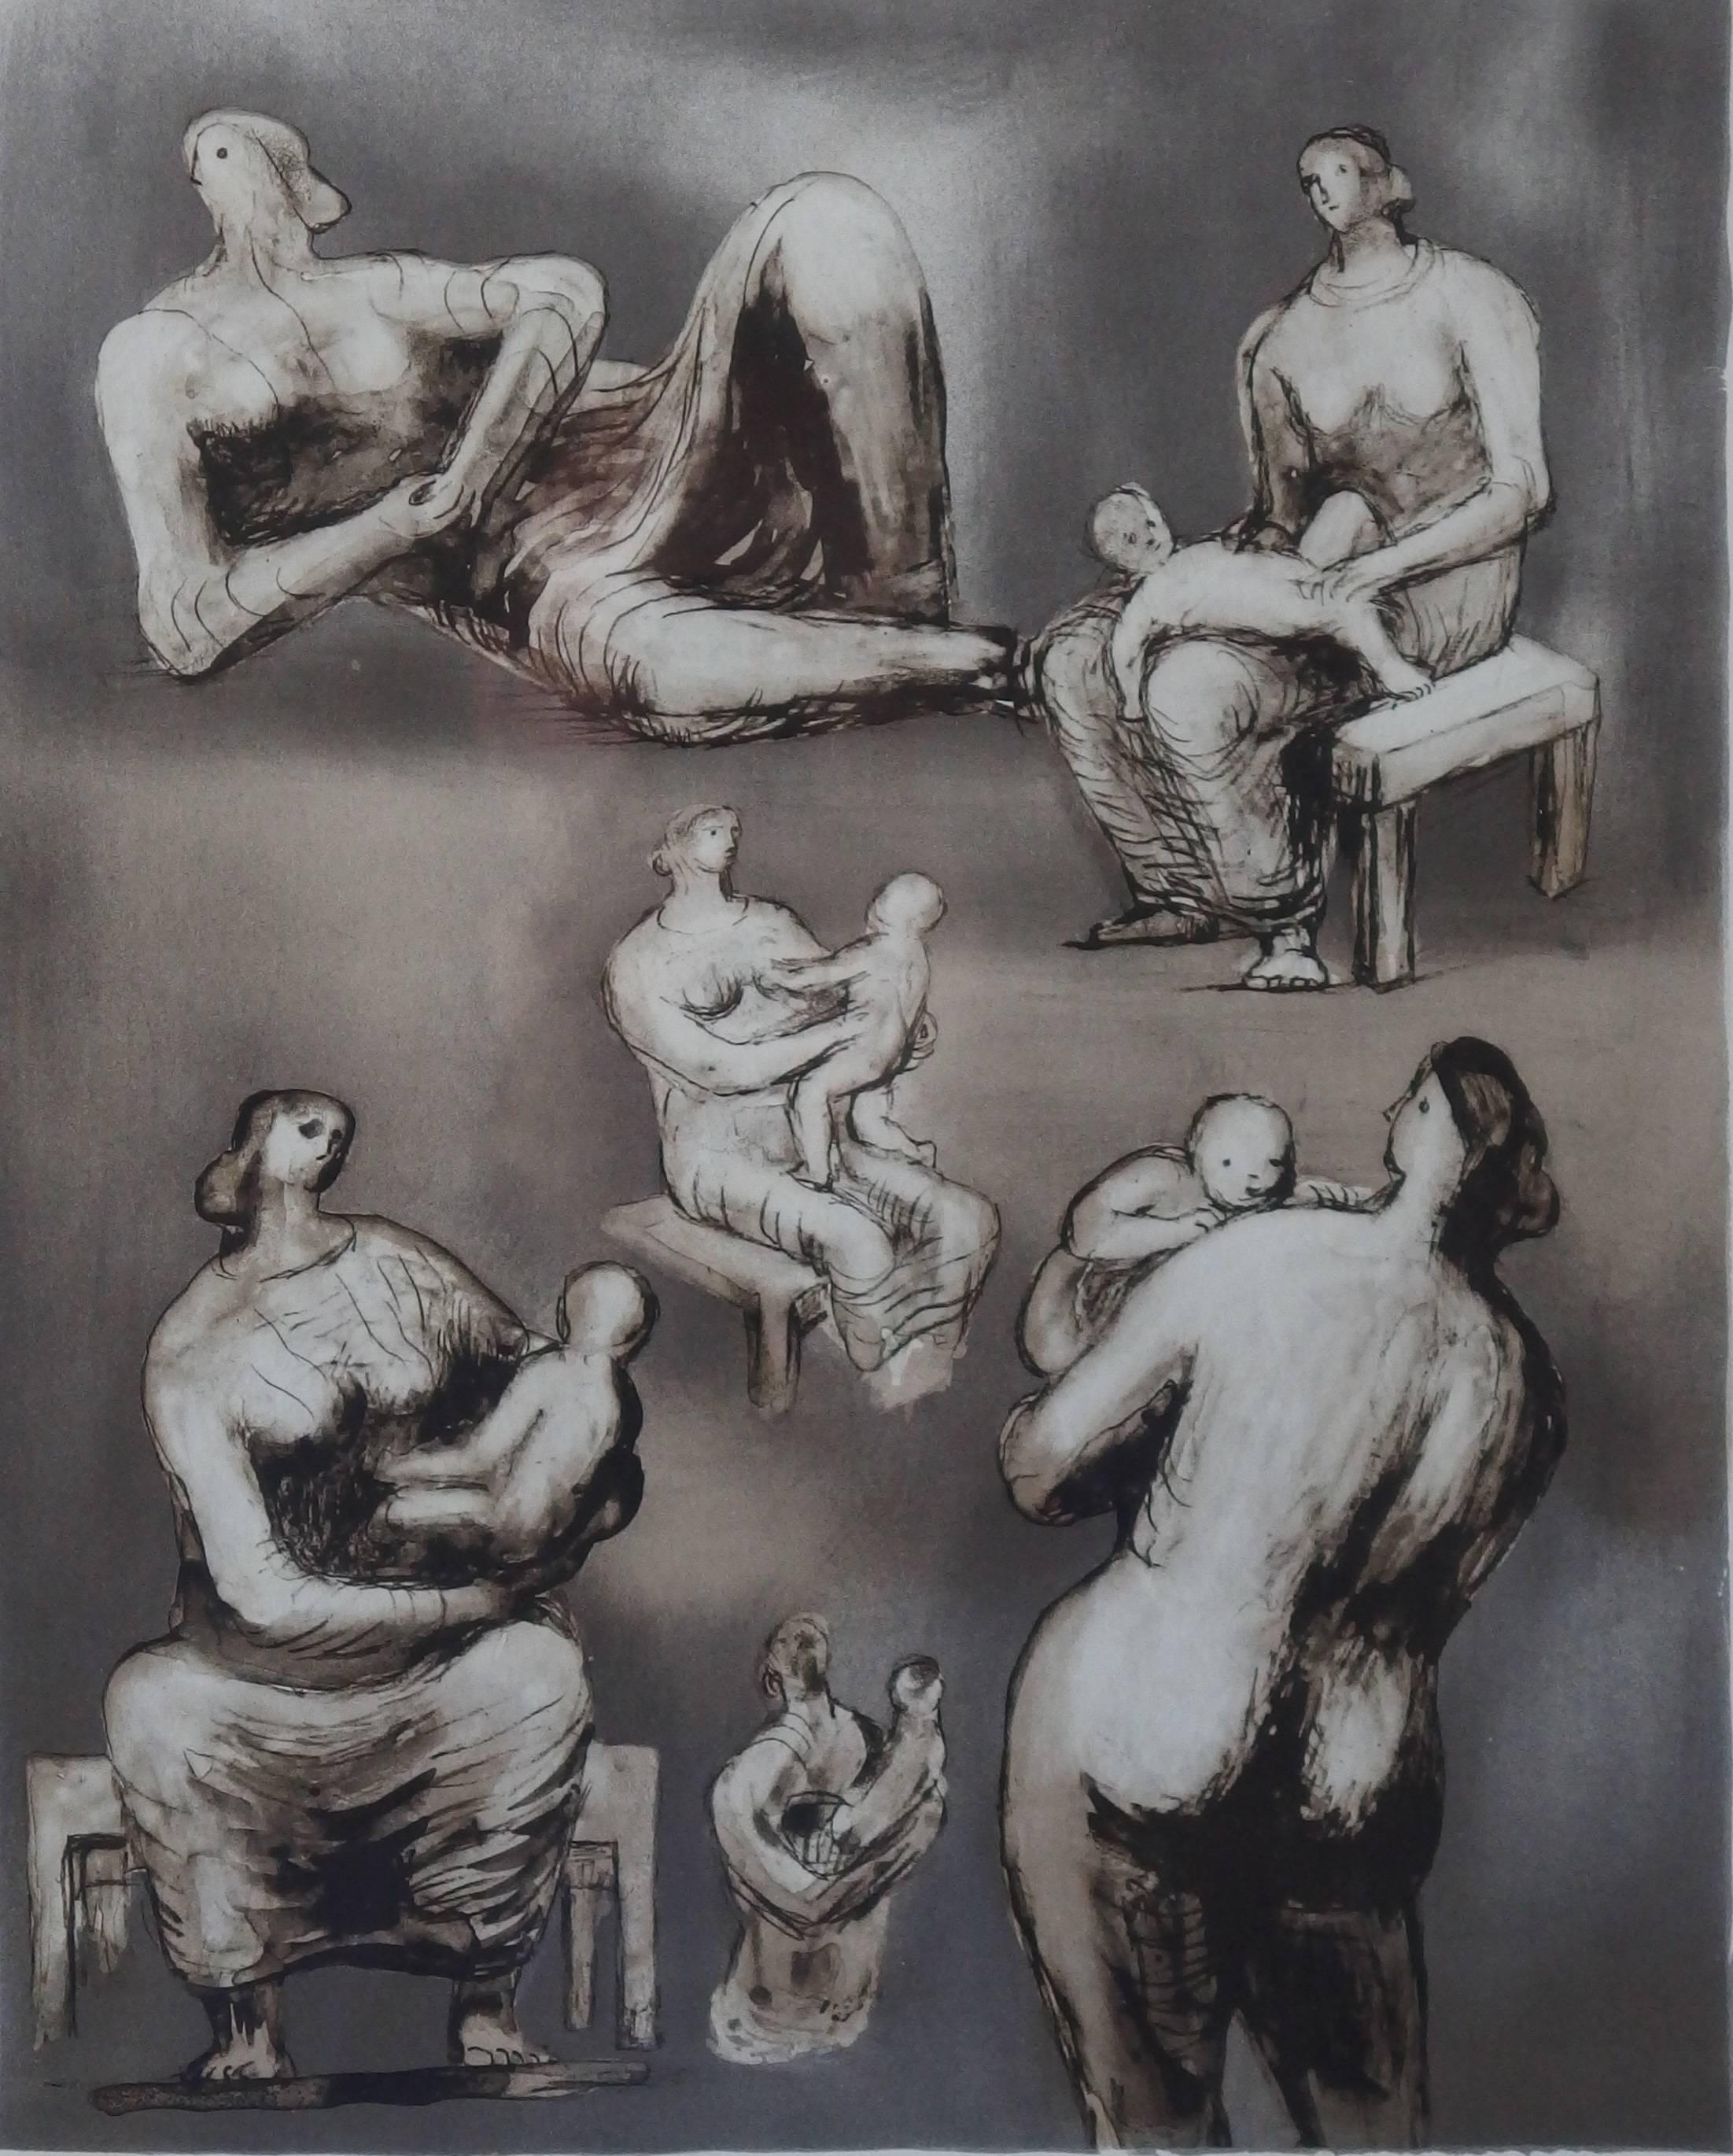 Henry MOORE
Reclining Figure and Mother and Child Studies, 1977

Original Lithograph 
Handsigned in pencil
Numbered 38/75
On vellum
48 x 40 cm (c. 19 x 16